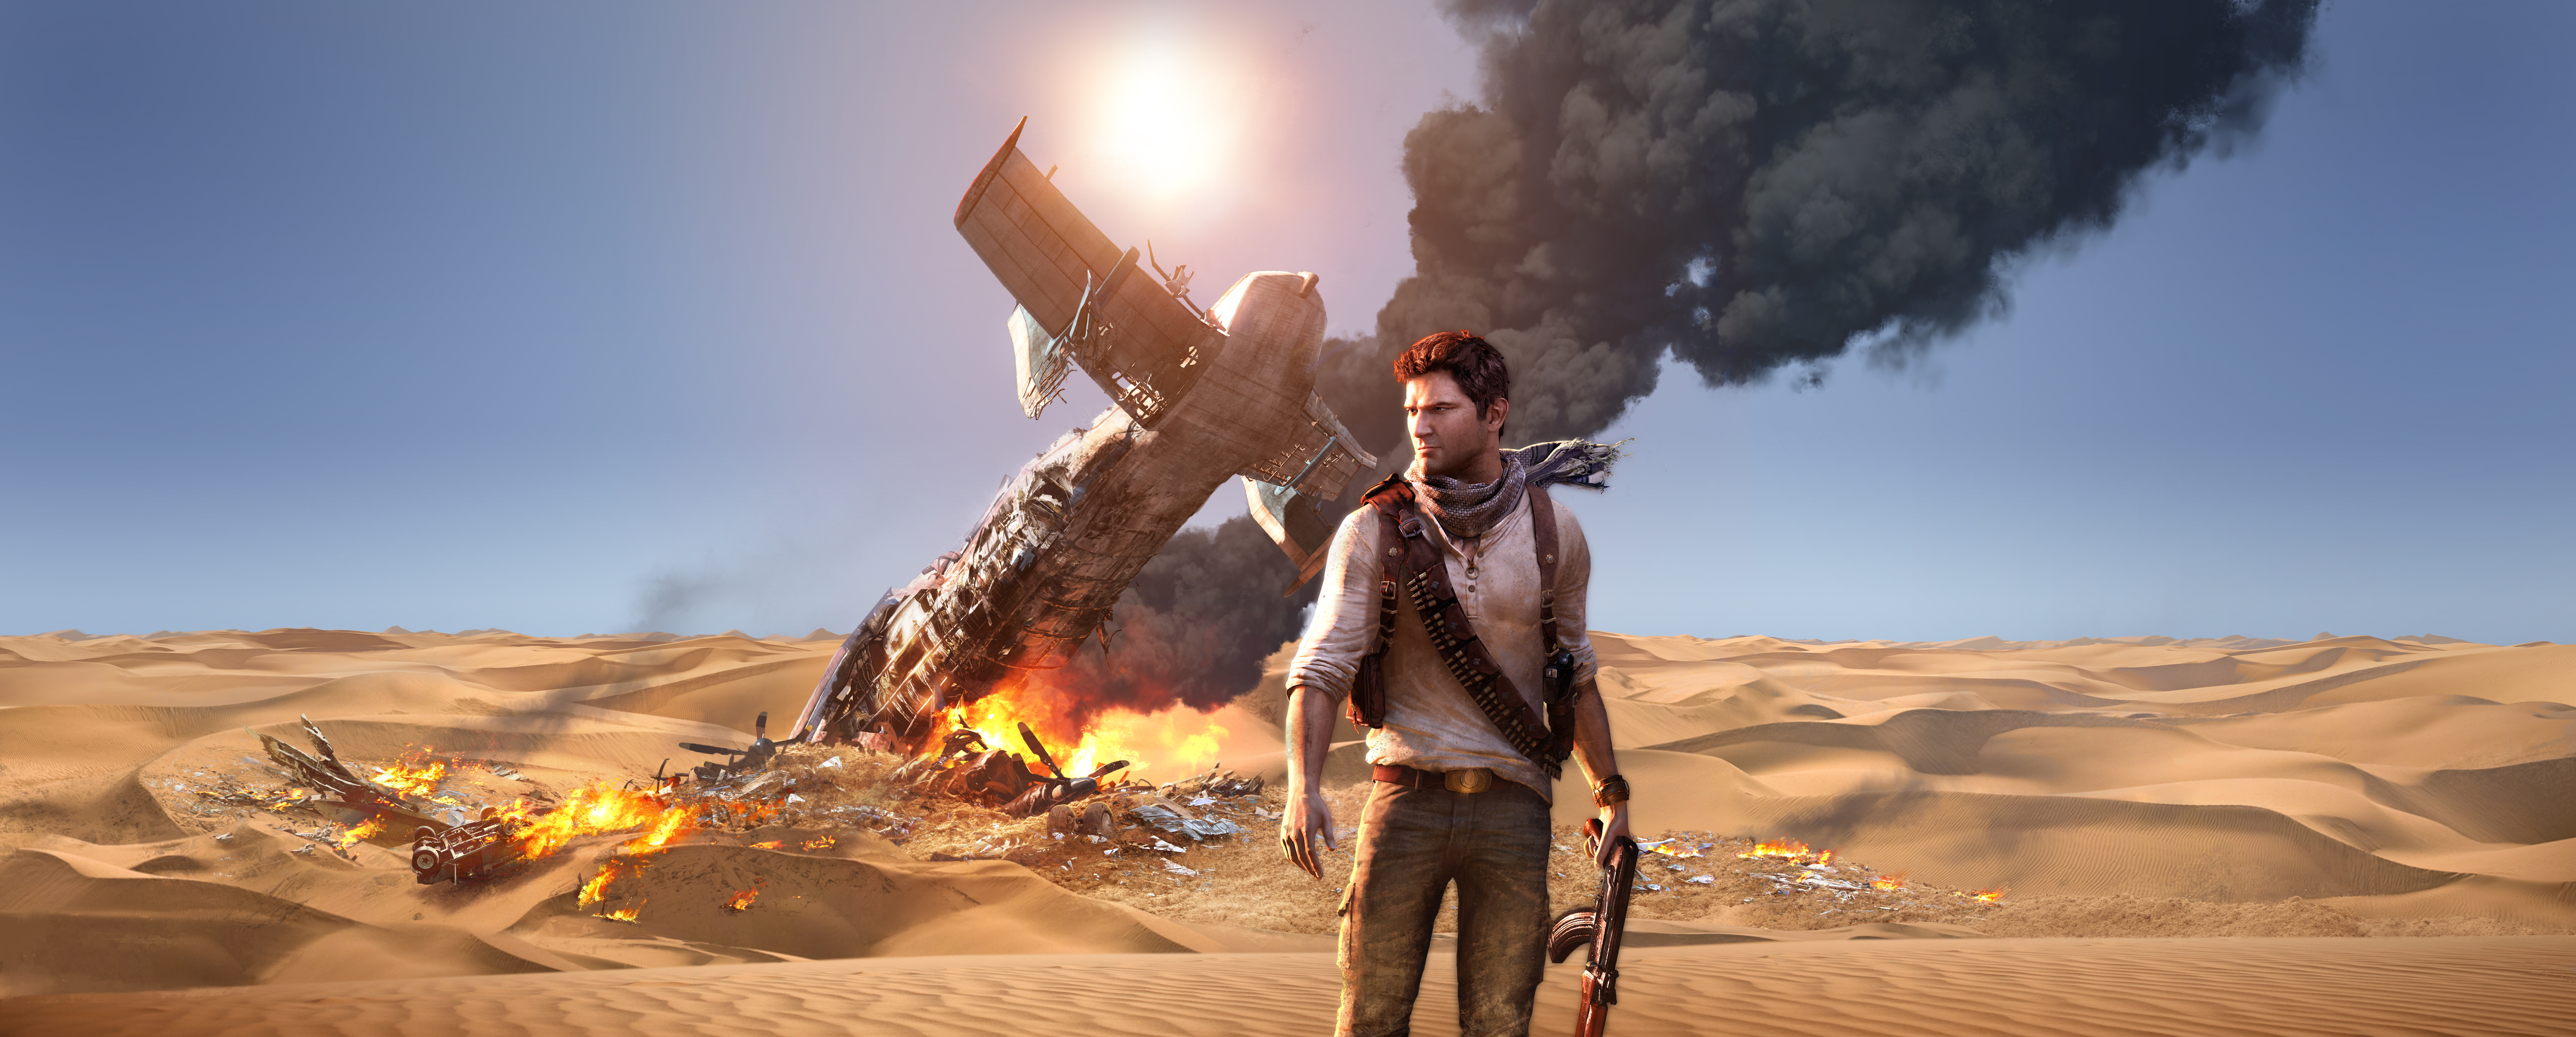 uncharted, nathan drake, uncharted 3: drake's deception, video game